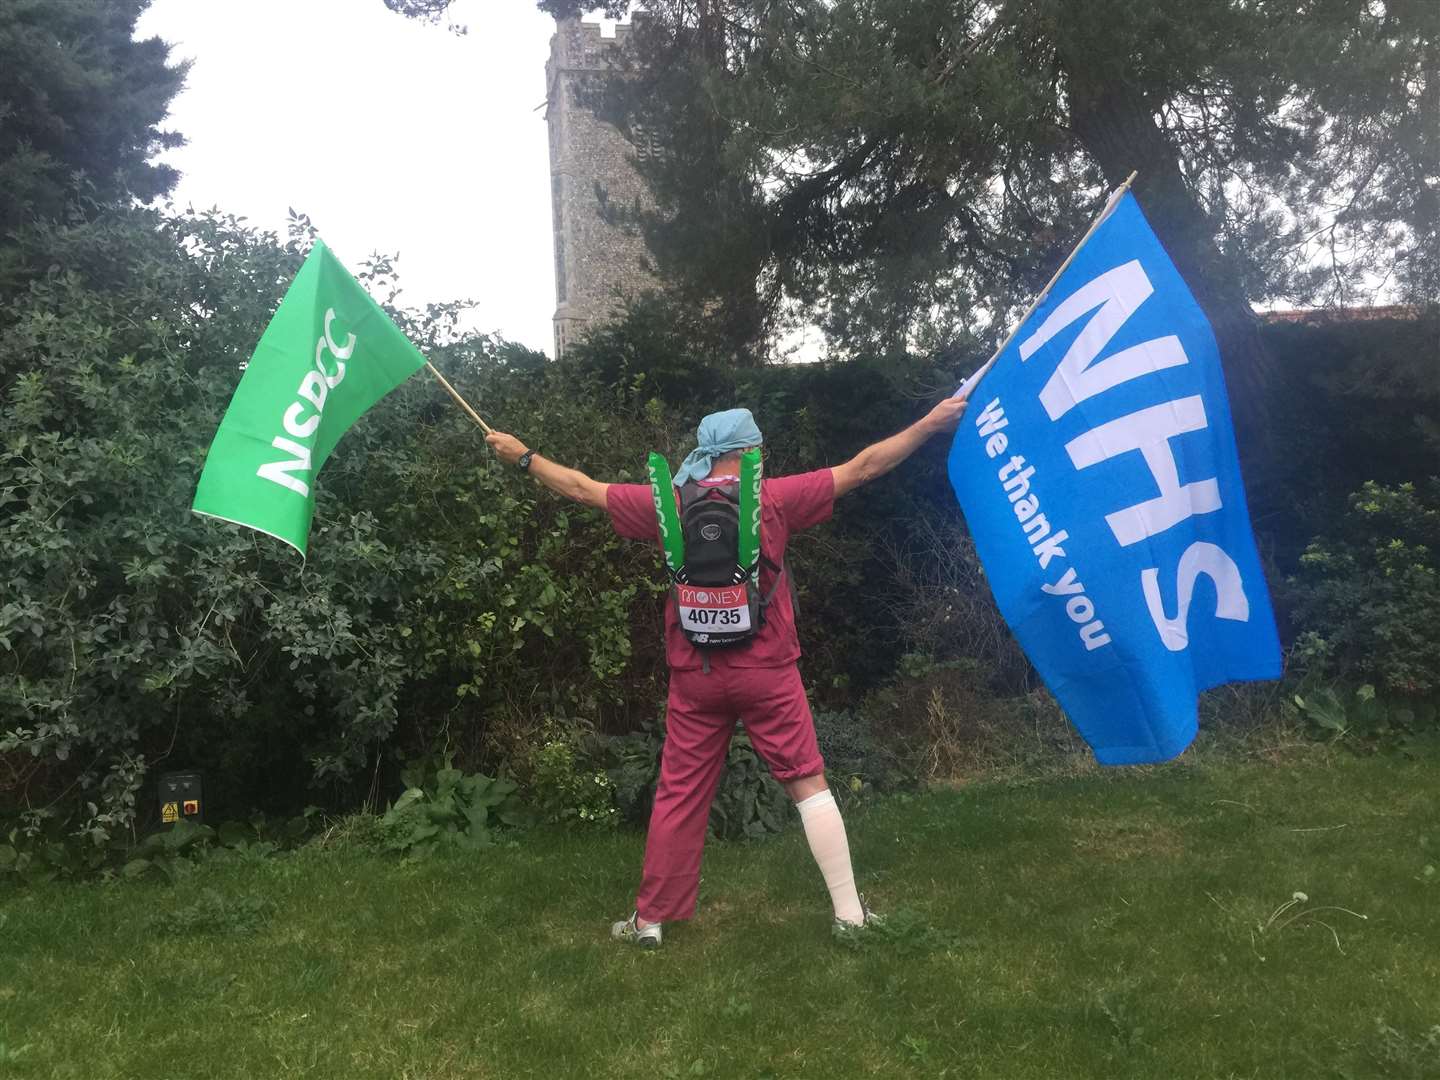 Mr Gallo is running the virtual London Marathon for the NSPCC and Colchester and Ipswich Hospitals Charity (Simon Gallo/PA)